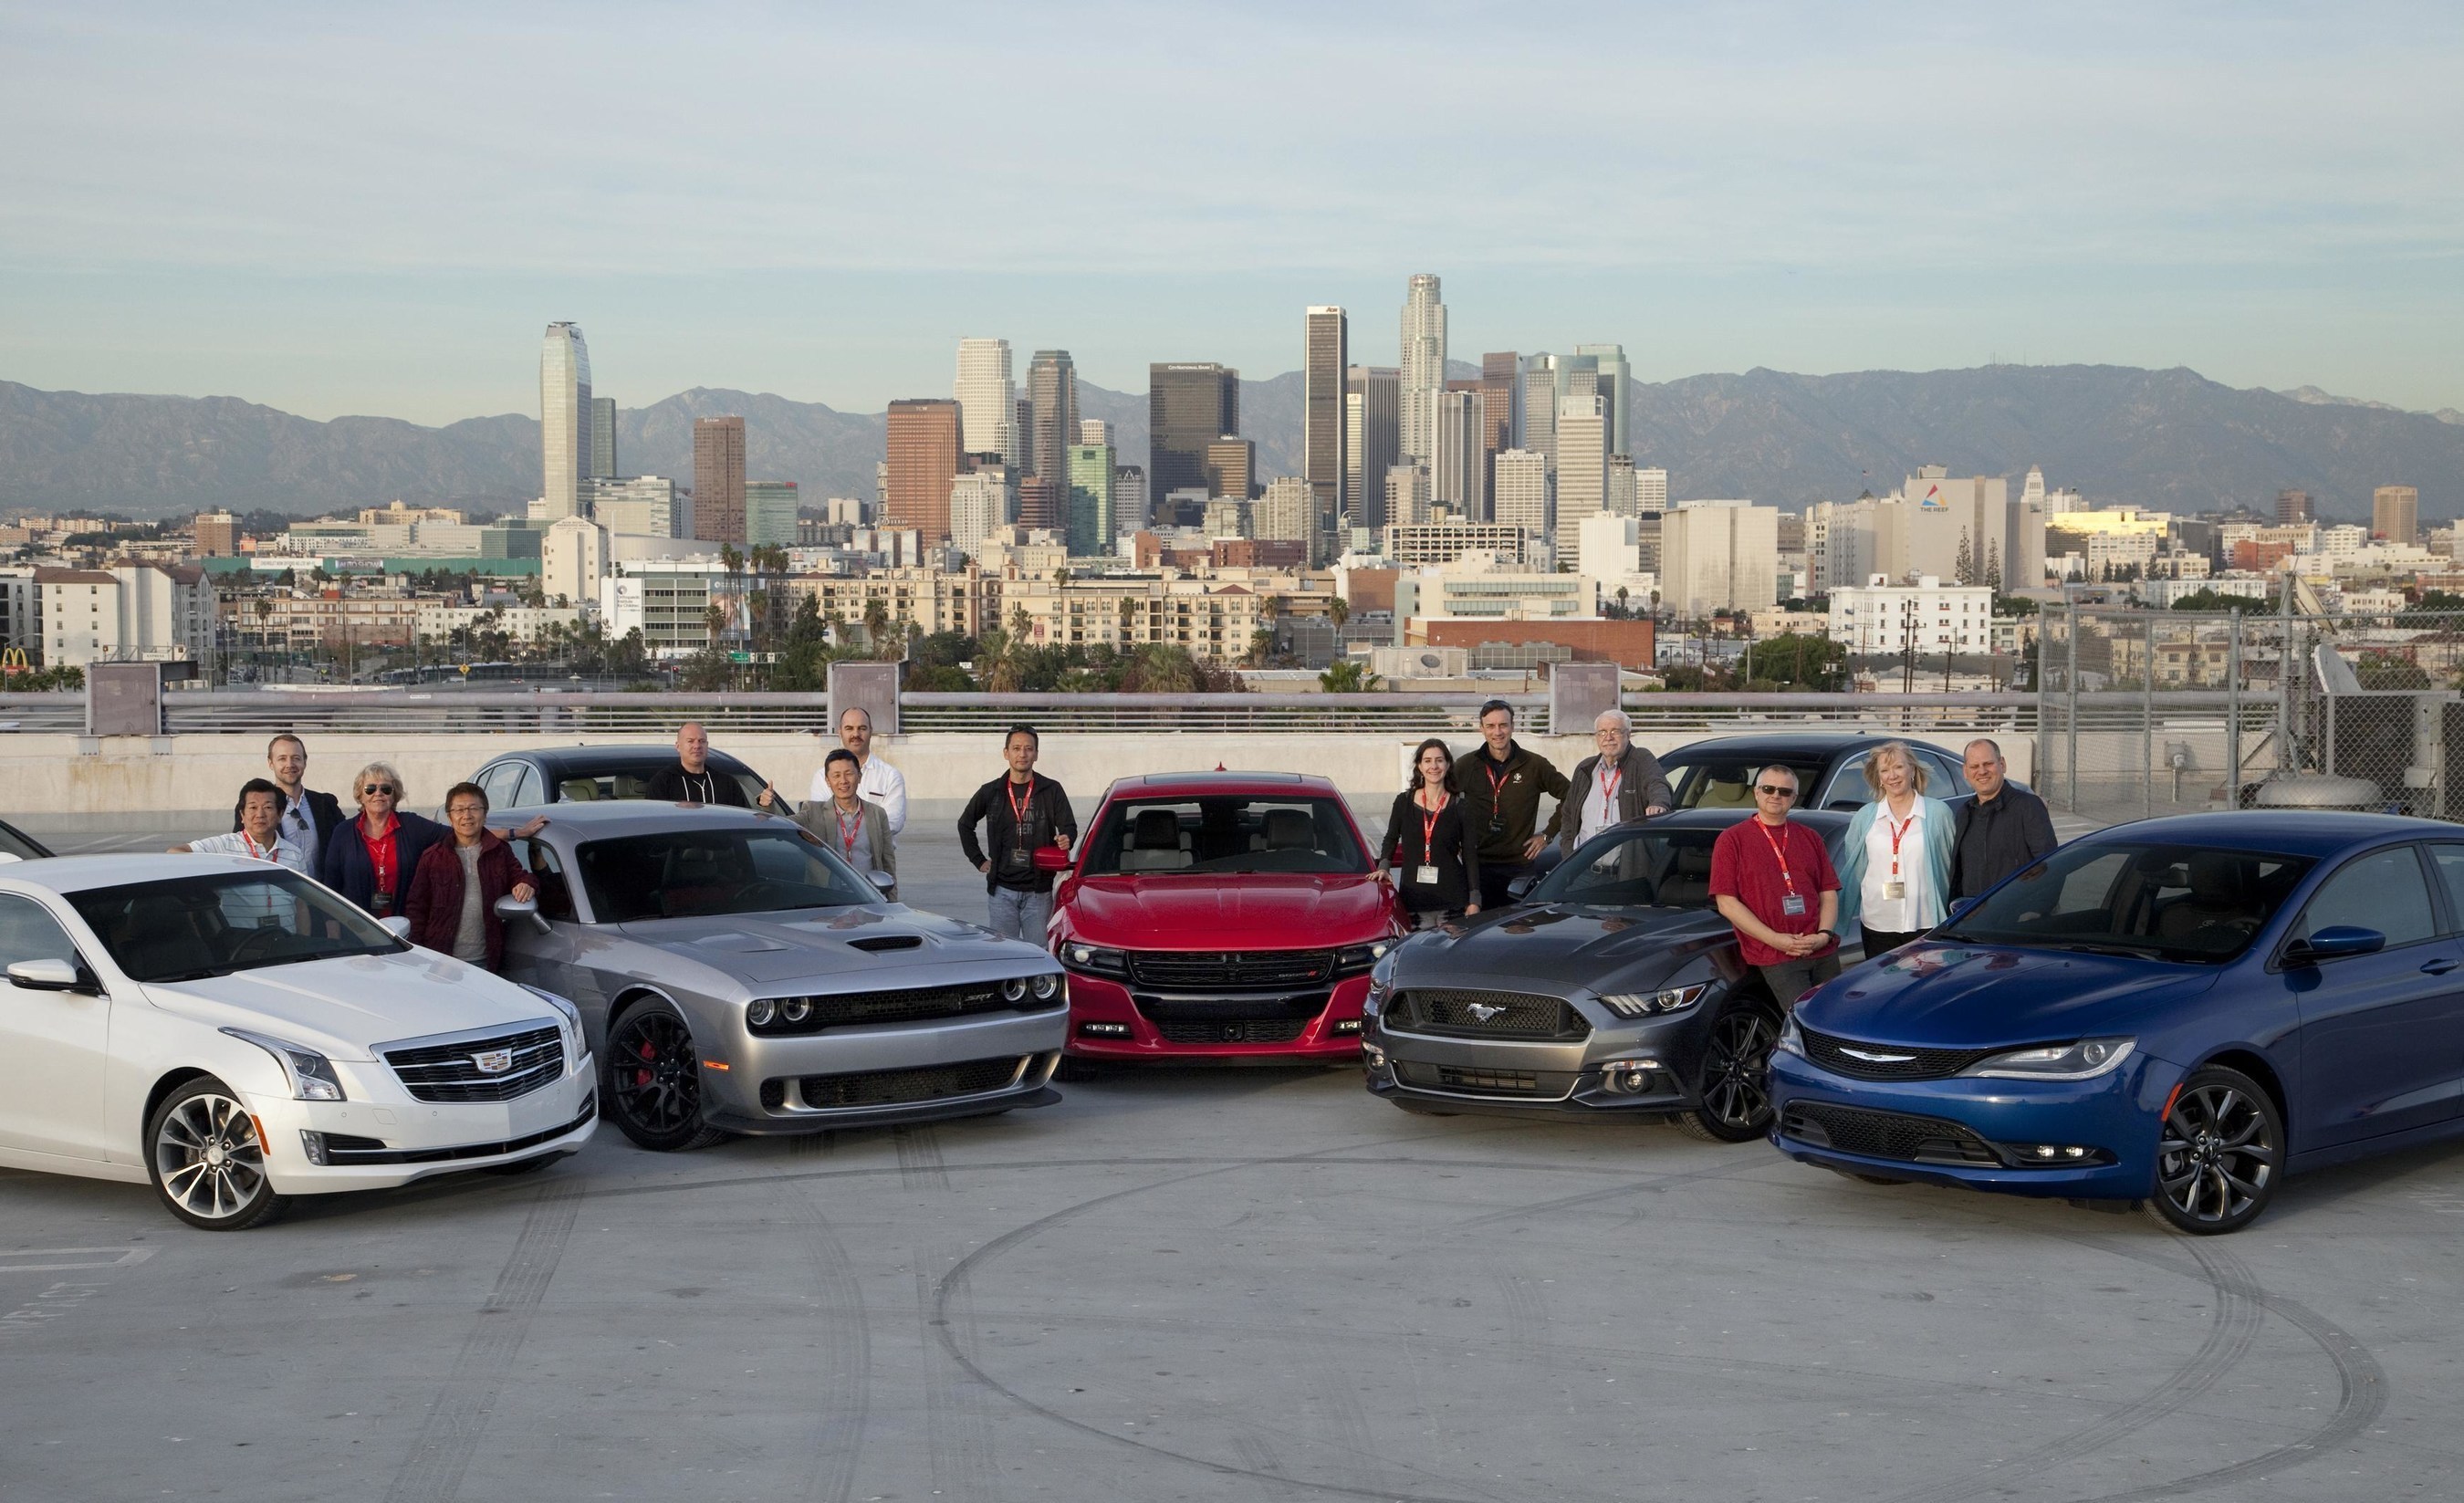 World Car Awards jurors test cars for the awards program that will be announced at the 2015 New York Auto Show next spring.